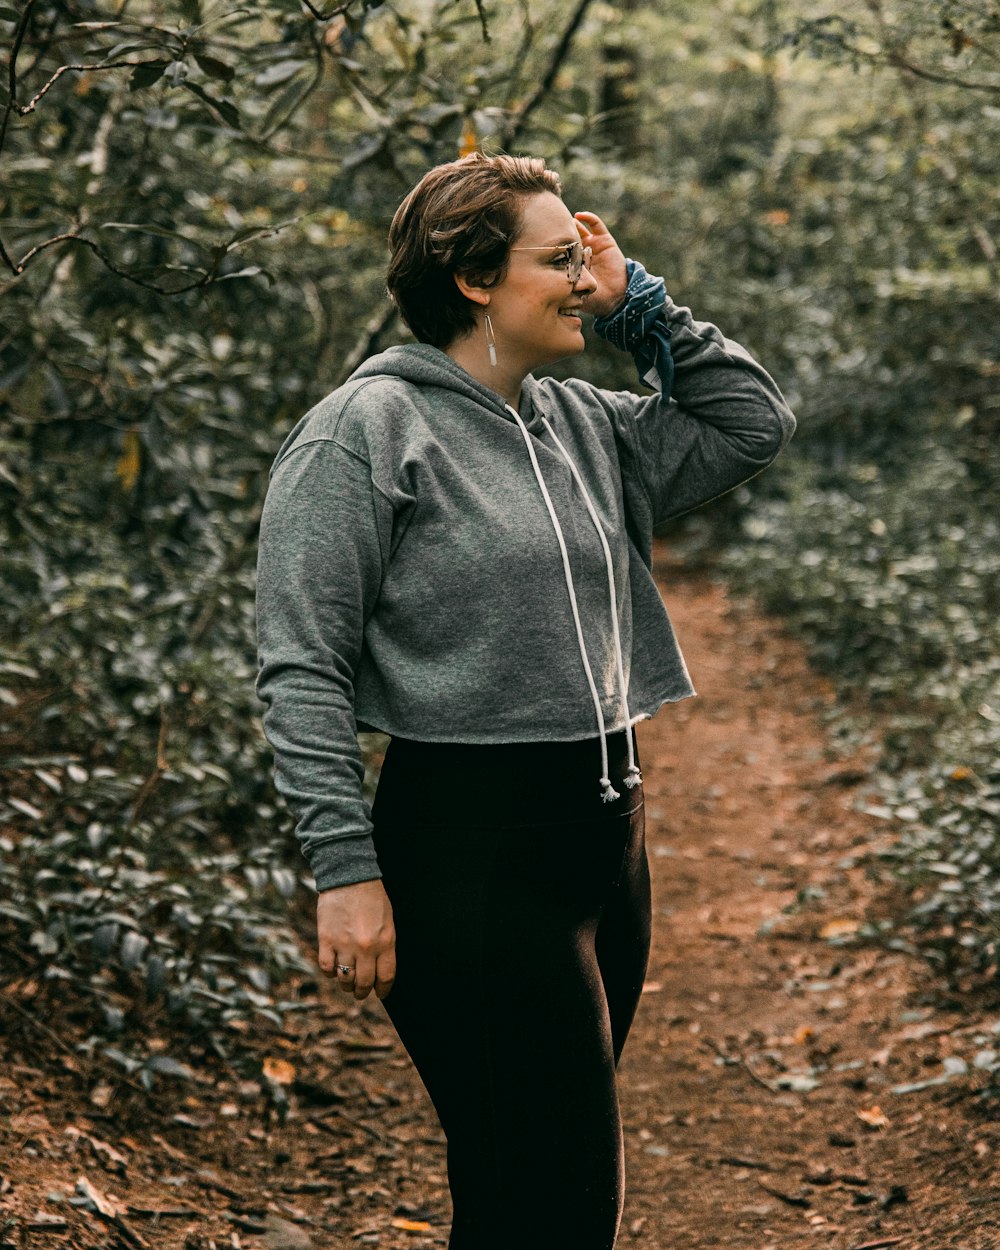 woman in gray hoodie standing on brown dried leaves during daytime